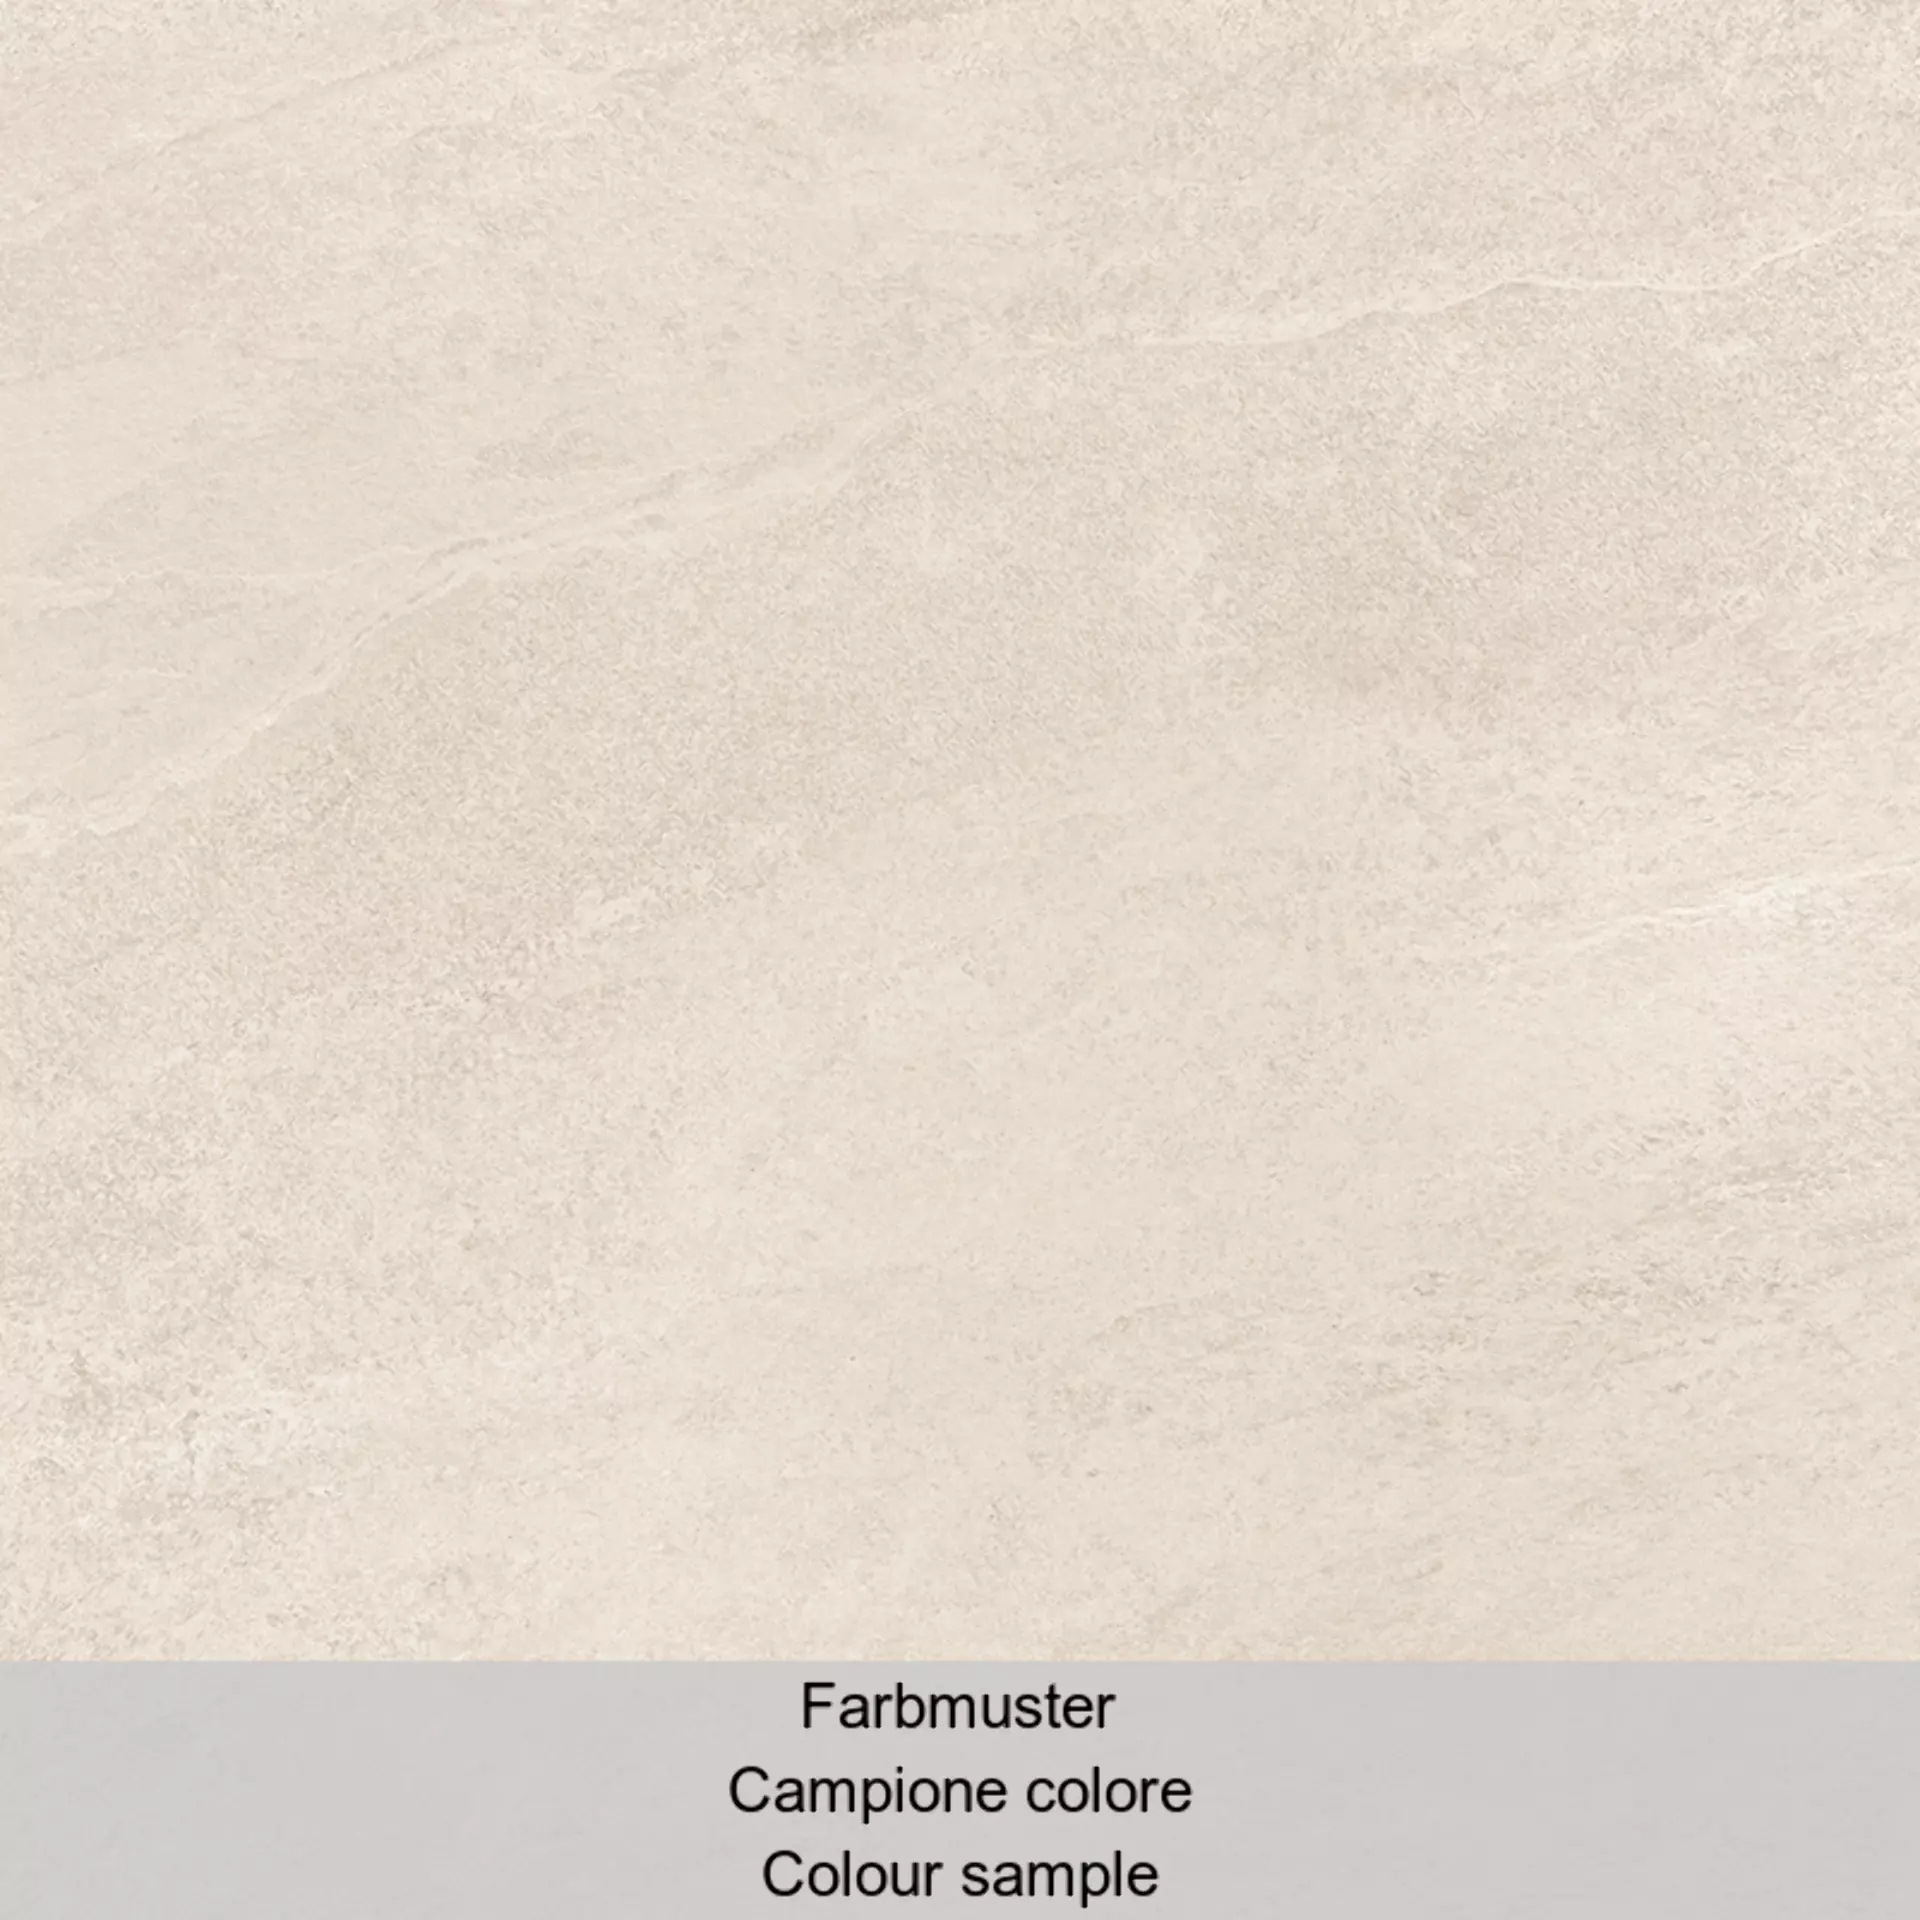 Novabell Norgestone Ivory Struttura Cesello NST861R 30x60cm rectified 9mm